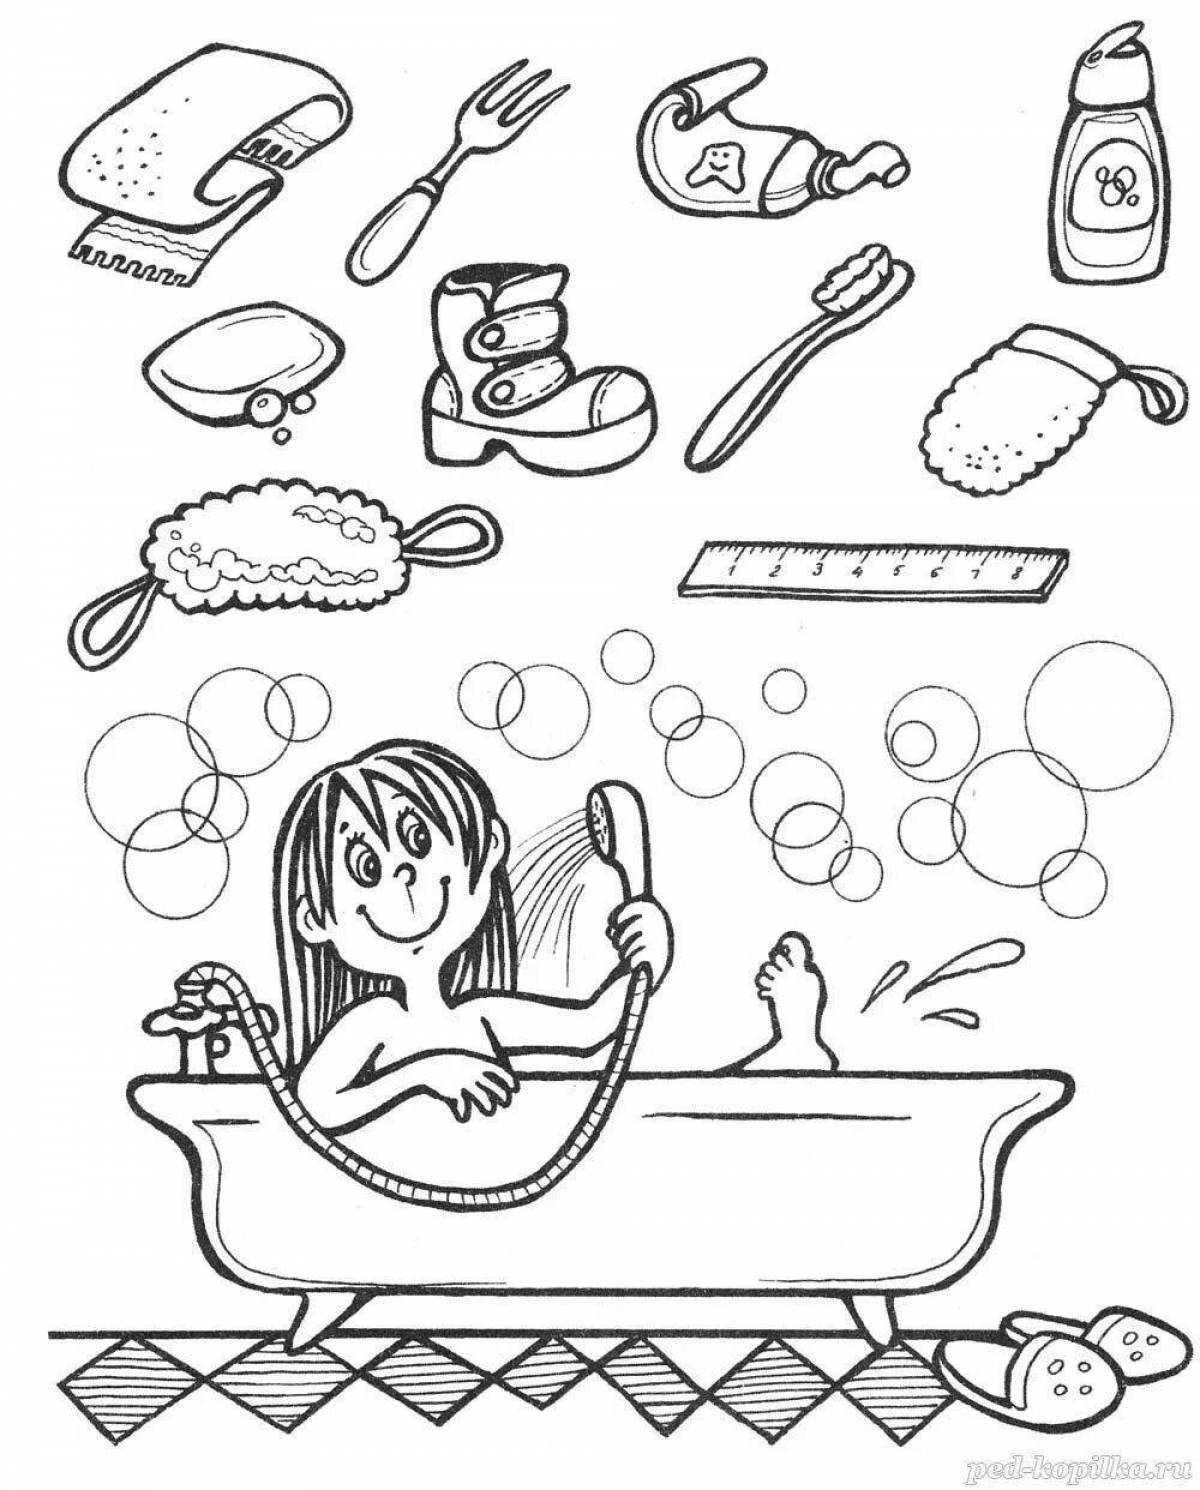 Bright hygienic coloring book for babies